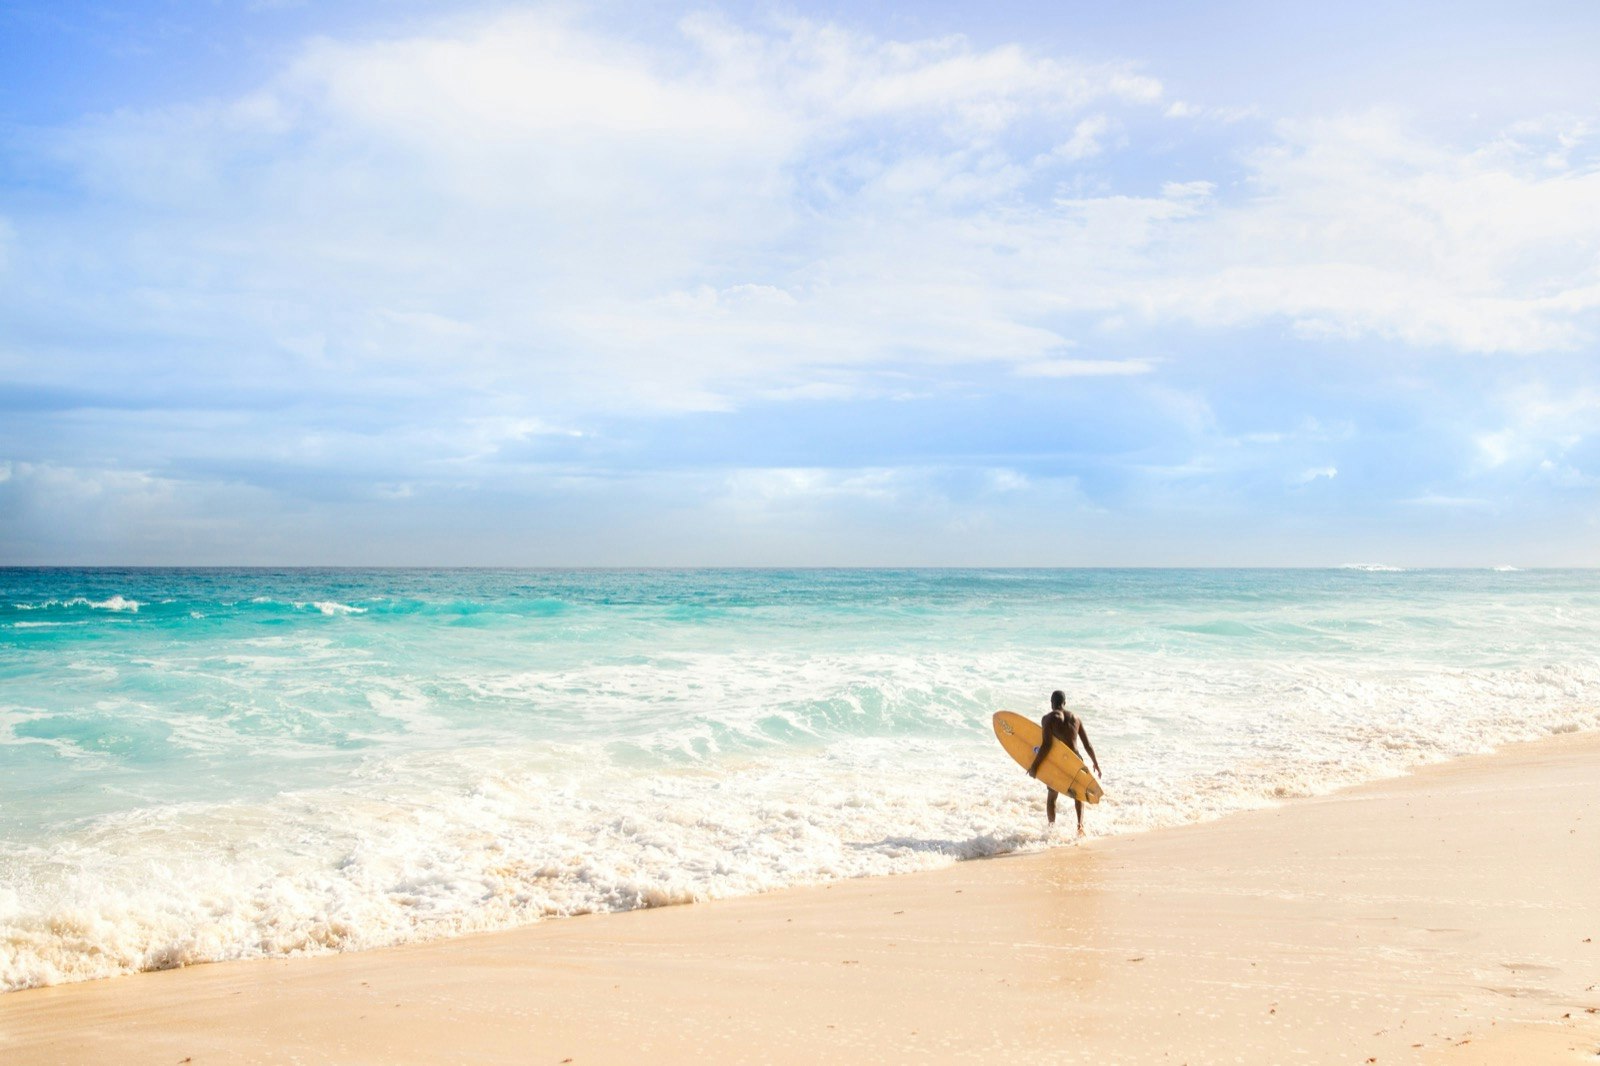 A man stands with is back to the camera at the edge of the ocean with a surf board